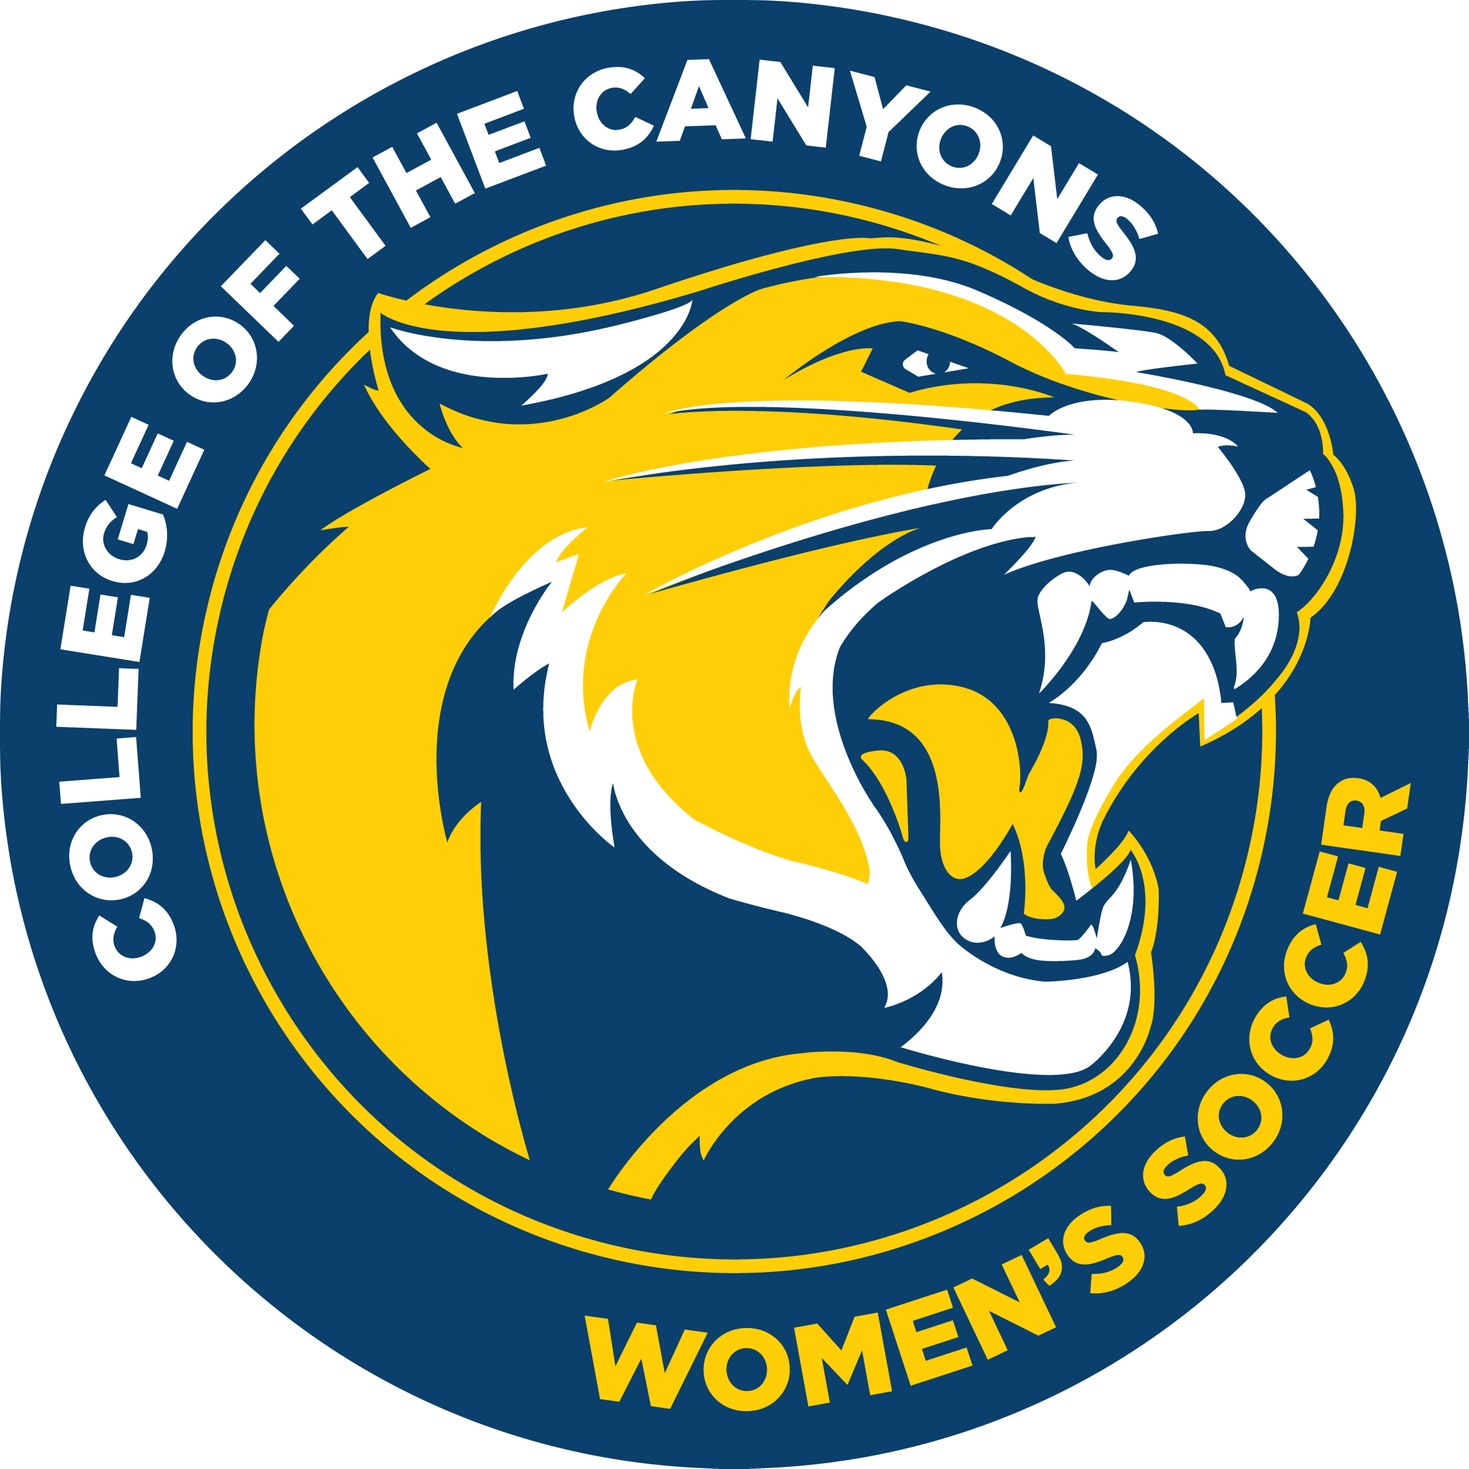 College of the Canyons women's soccer logo.